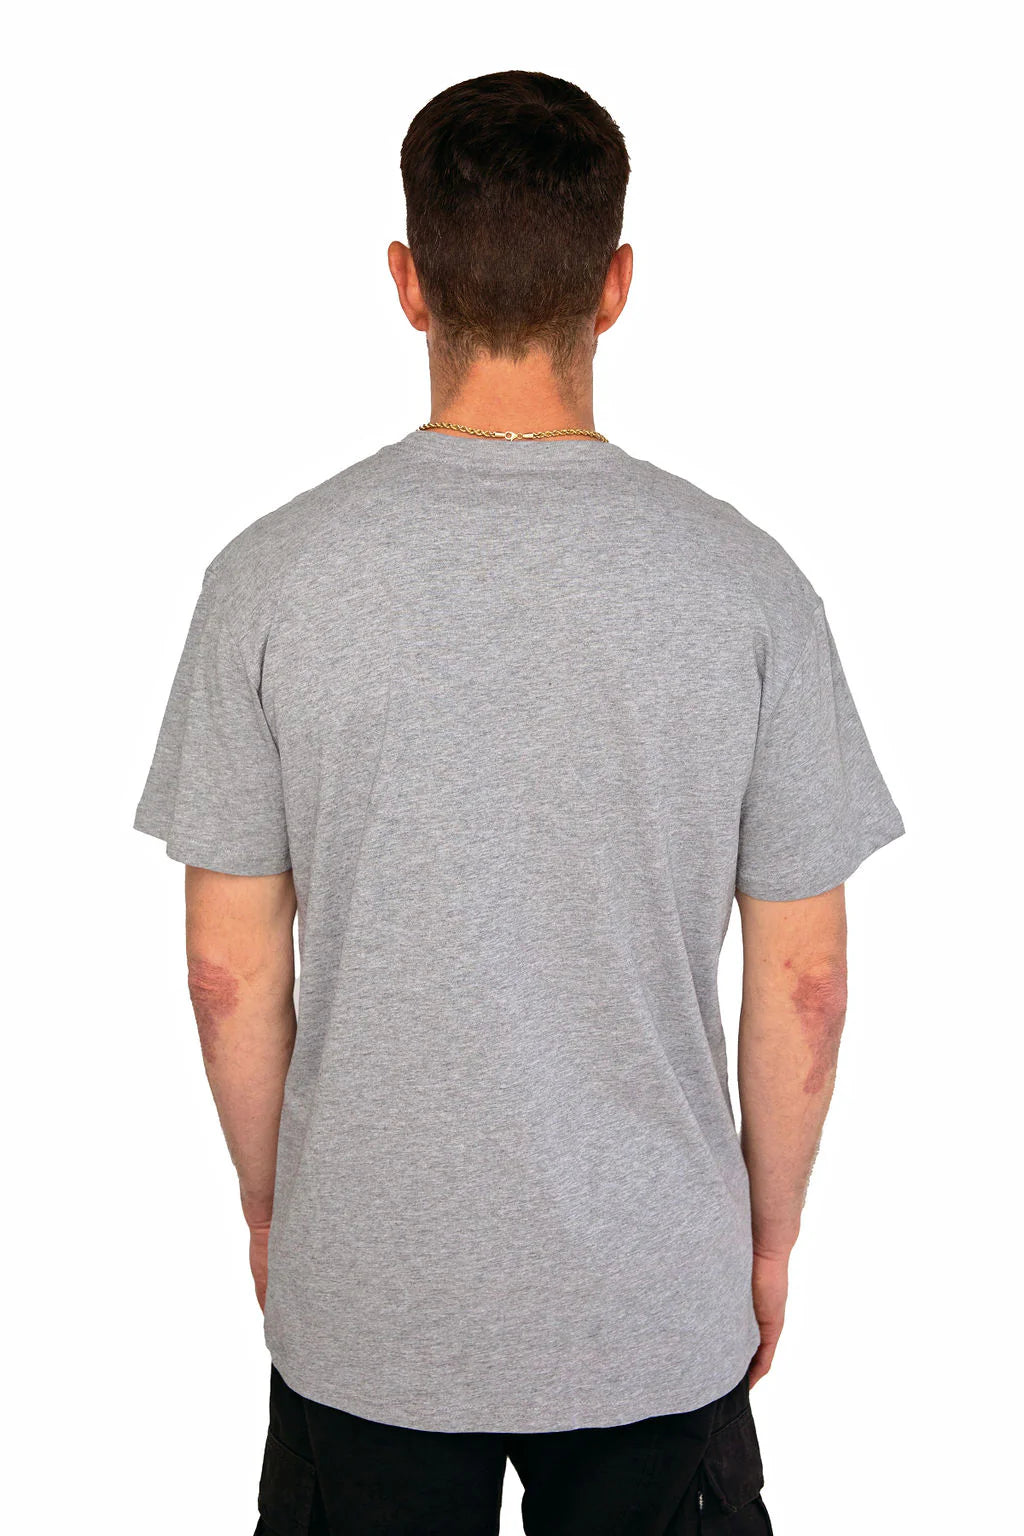 Dcypher Apparel Overload S/S T-Shirt - Grey Marle